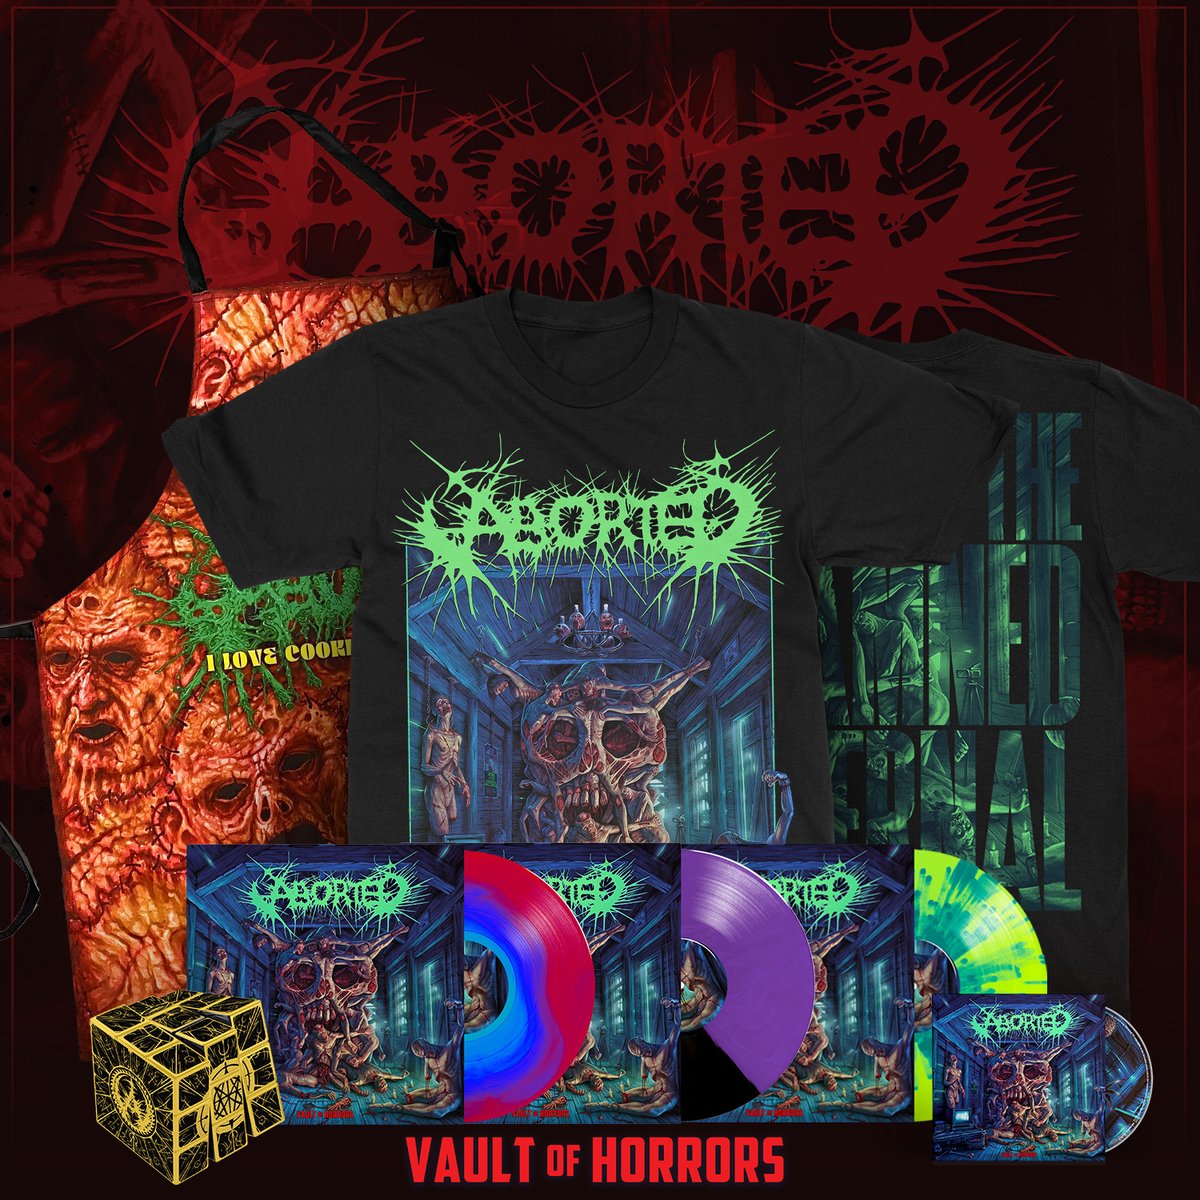 We opened the VAULT OF HORRORS and released the wonders within through @IndieMerchstore, @impericon_de @impericon_uk, Direct Merch and Fans and Bands Merch. Don’t get a huge case of horror FOMO cause these bad boys are moving quick!

aborted.bfan.link/death-cult